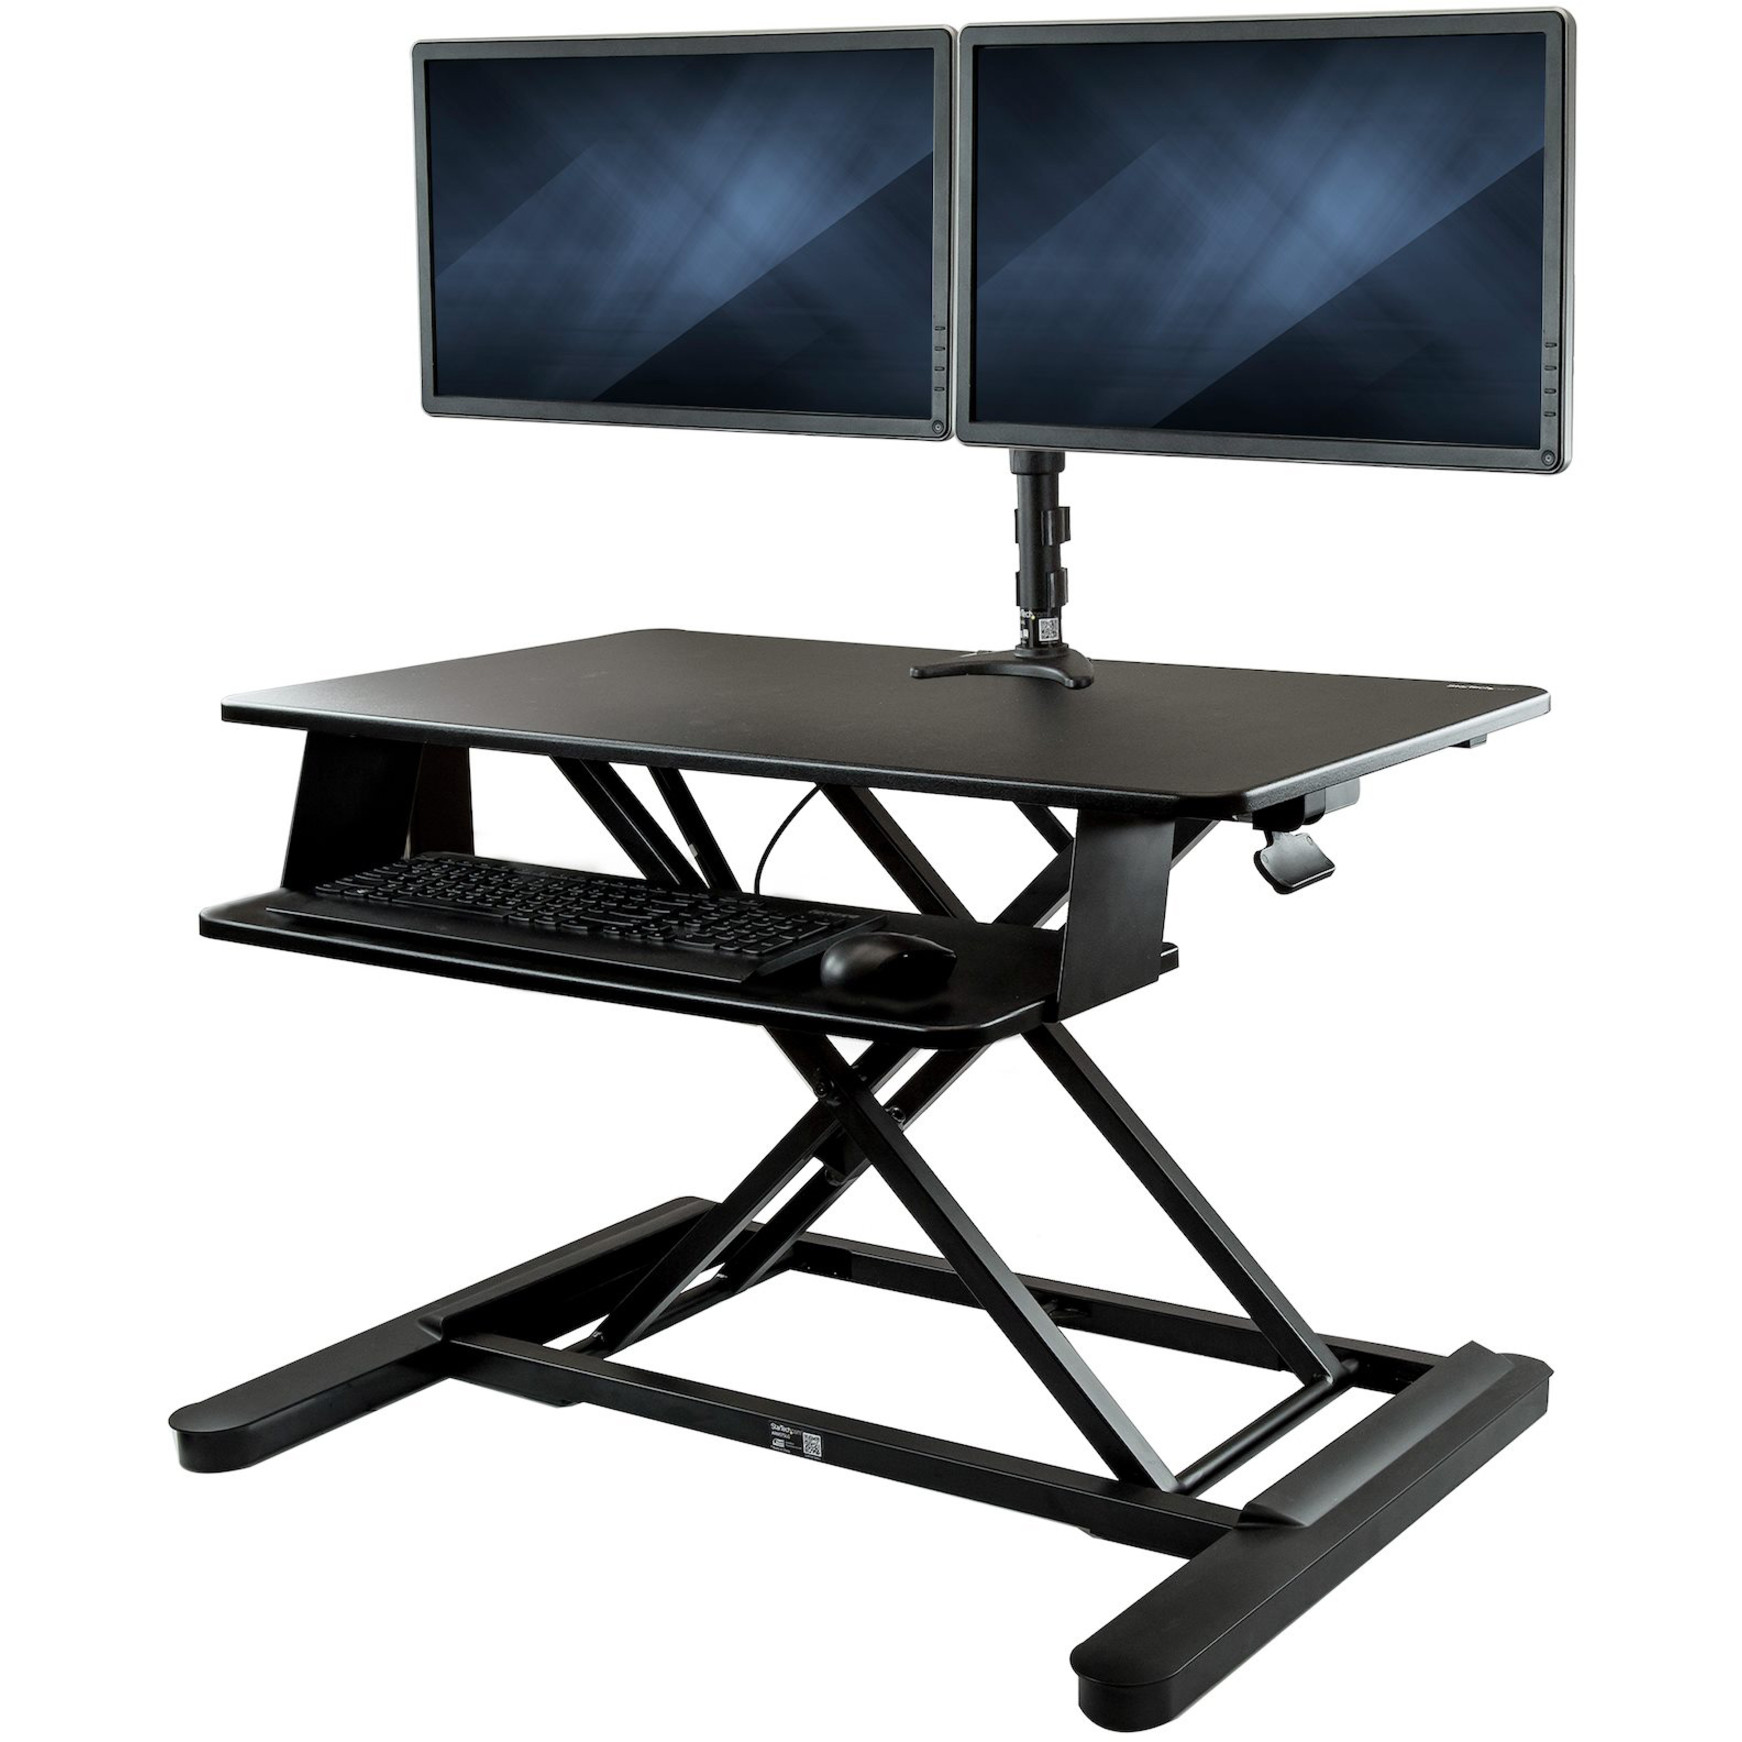 Startech .com Dual Monitor Sit Stand Desk Converter35″ WideHeight Adjustable Standing Desk Solution -Dual Arms for up to 24″ Monitors… BNDSTSLGDUAL